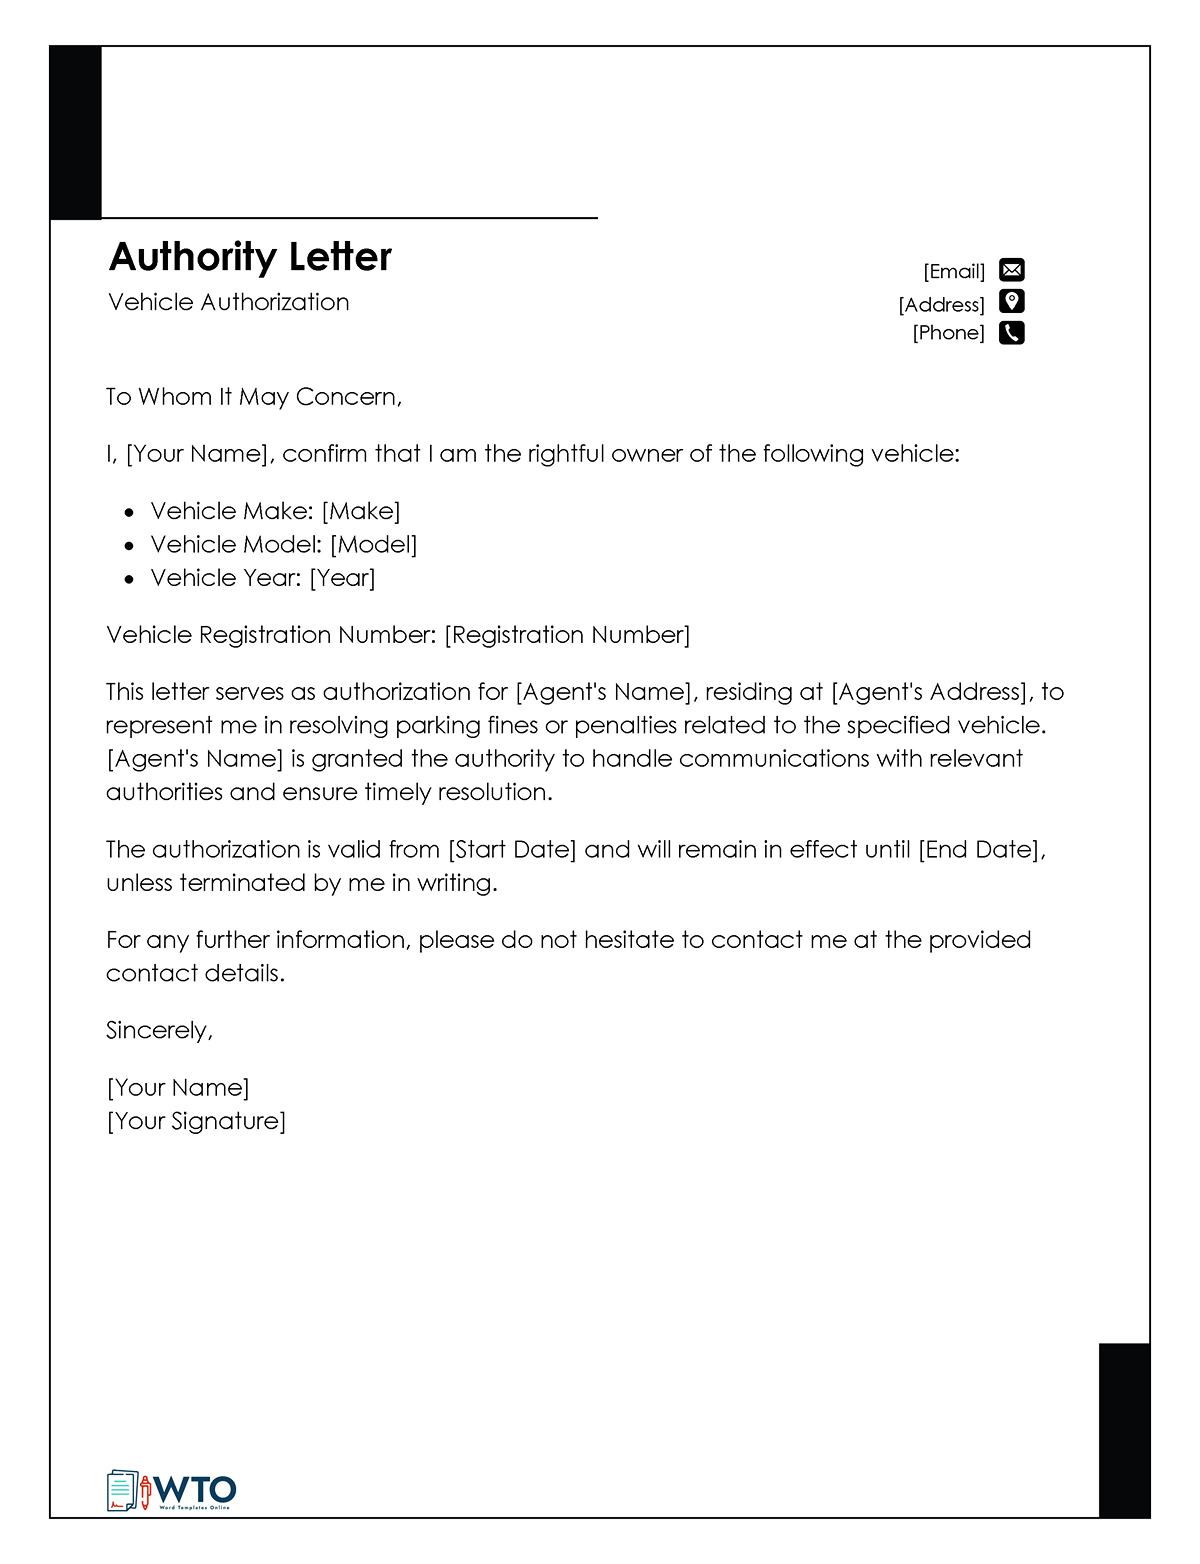 Vehicle Authorization Letter Template-Free in Ms Word